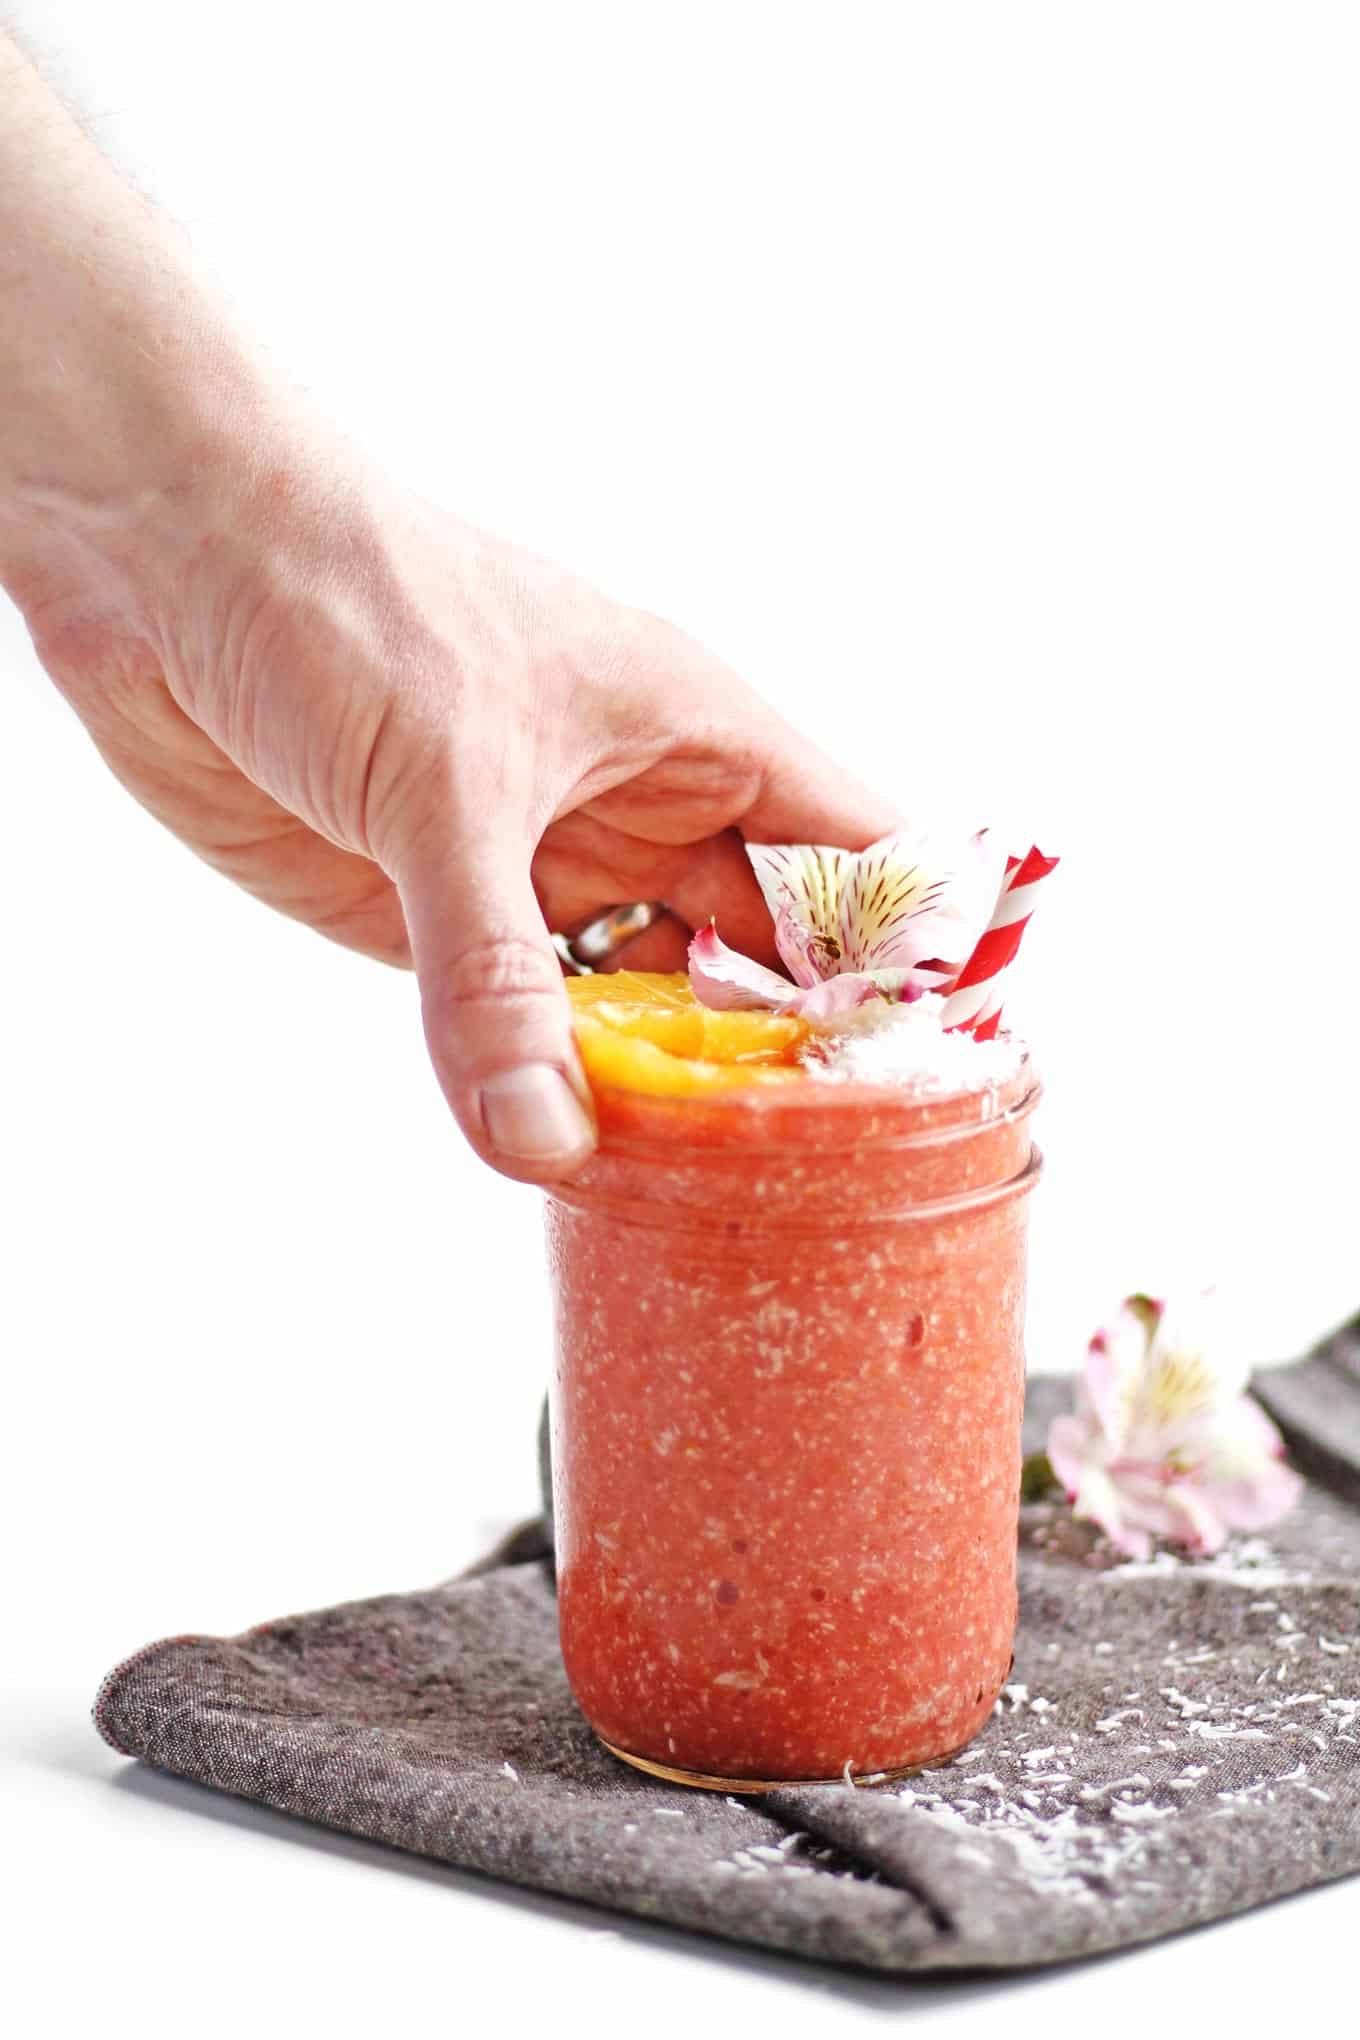 The perfect spring time smoothie! This tropical, refreshing meyer lemon strawberry smoothie with coconut includes an entire meyer lemon. A no waste recipe! Vegan, gluten free, clean eating, sugar free, dairy free, amazing. // Rhubarbarians